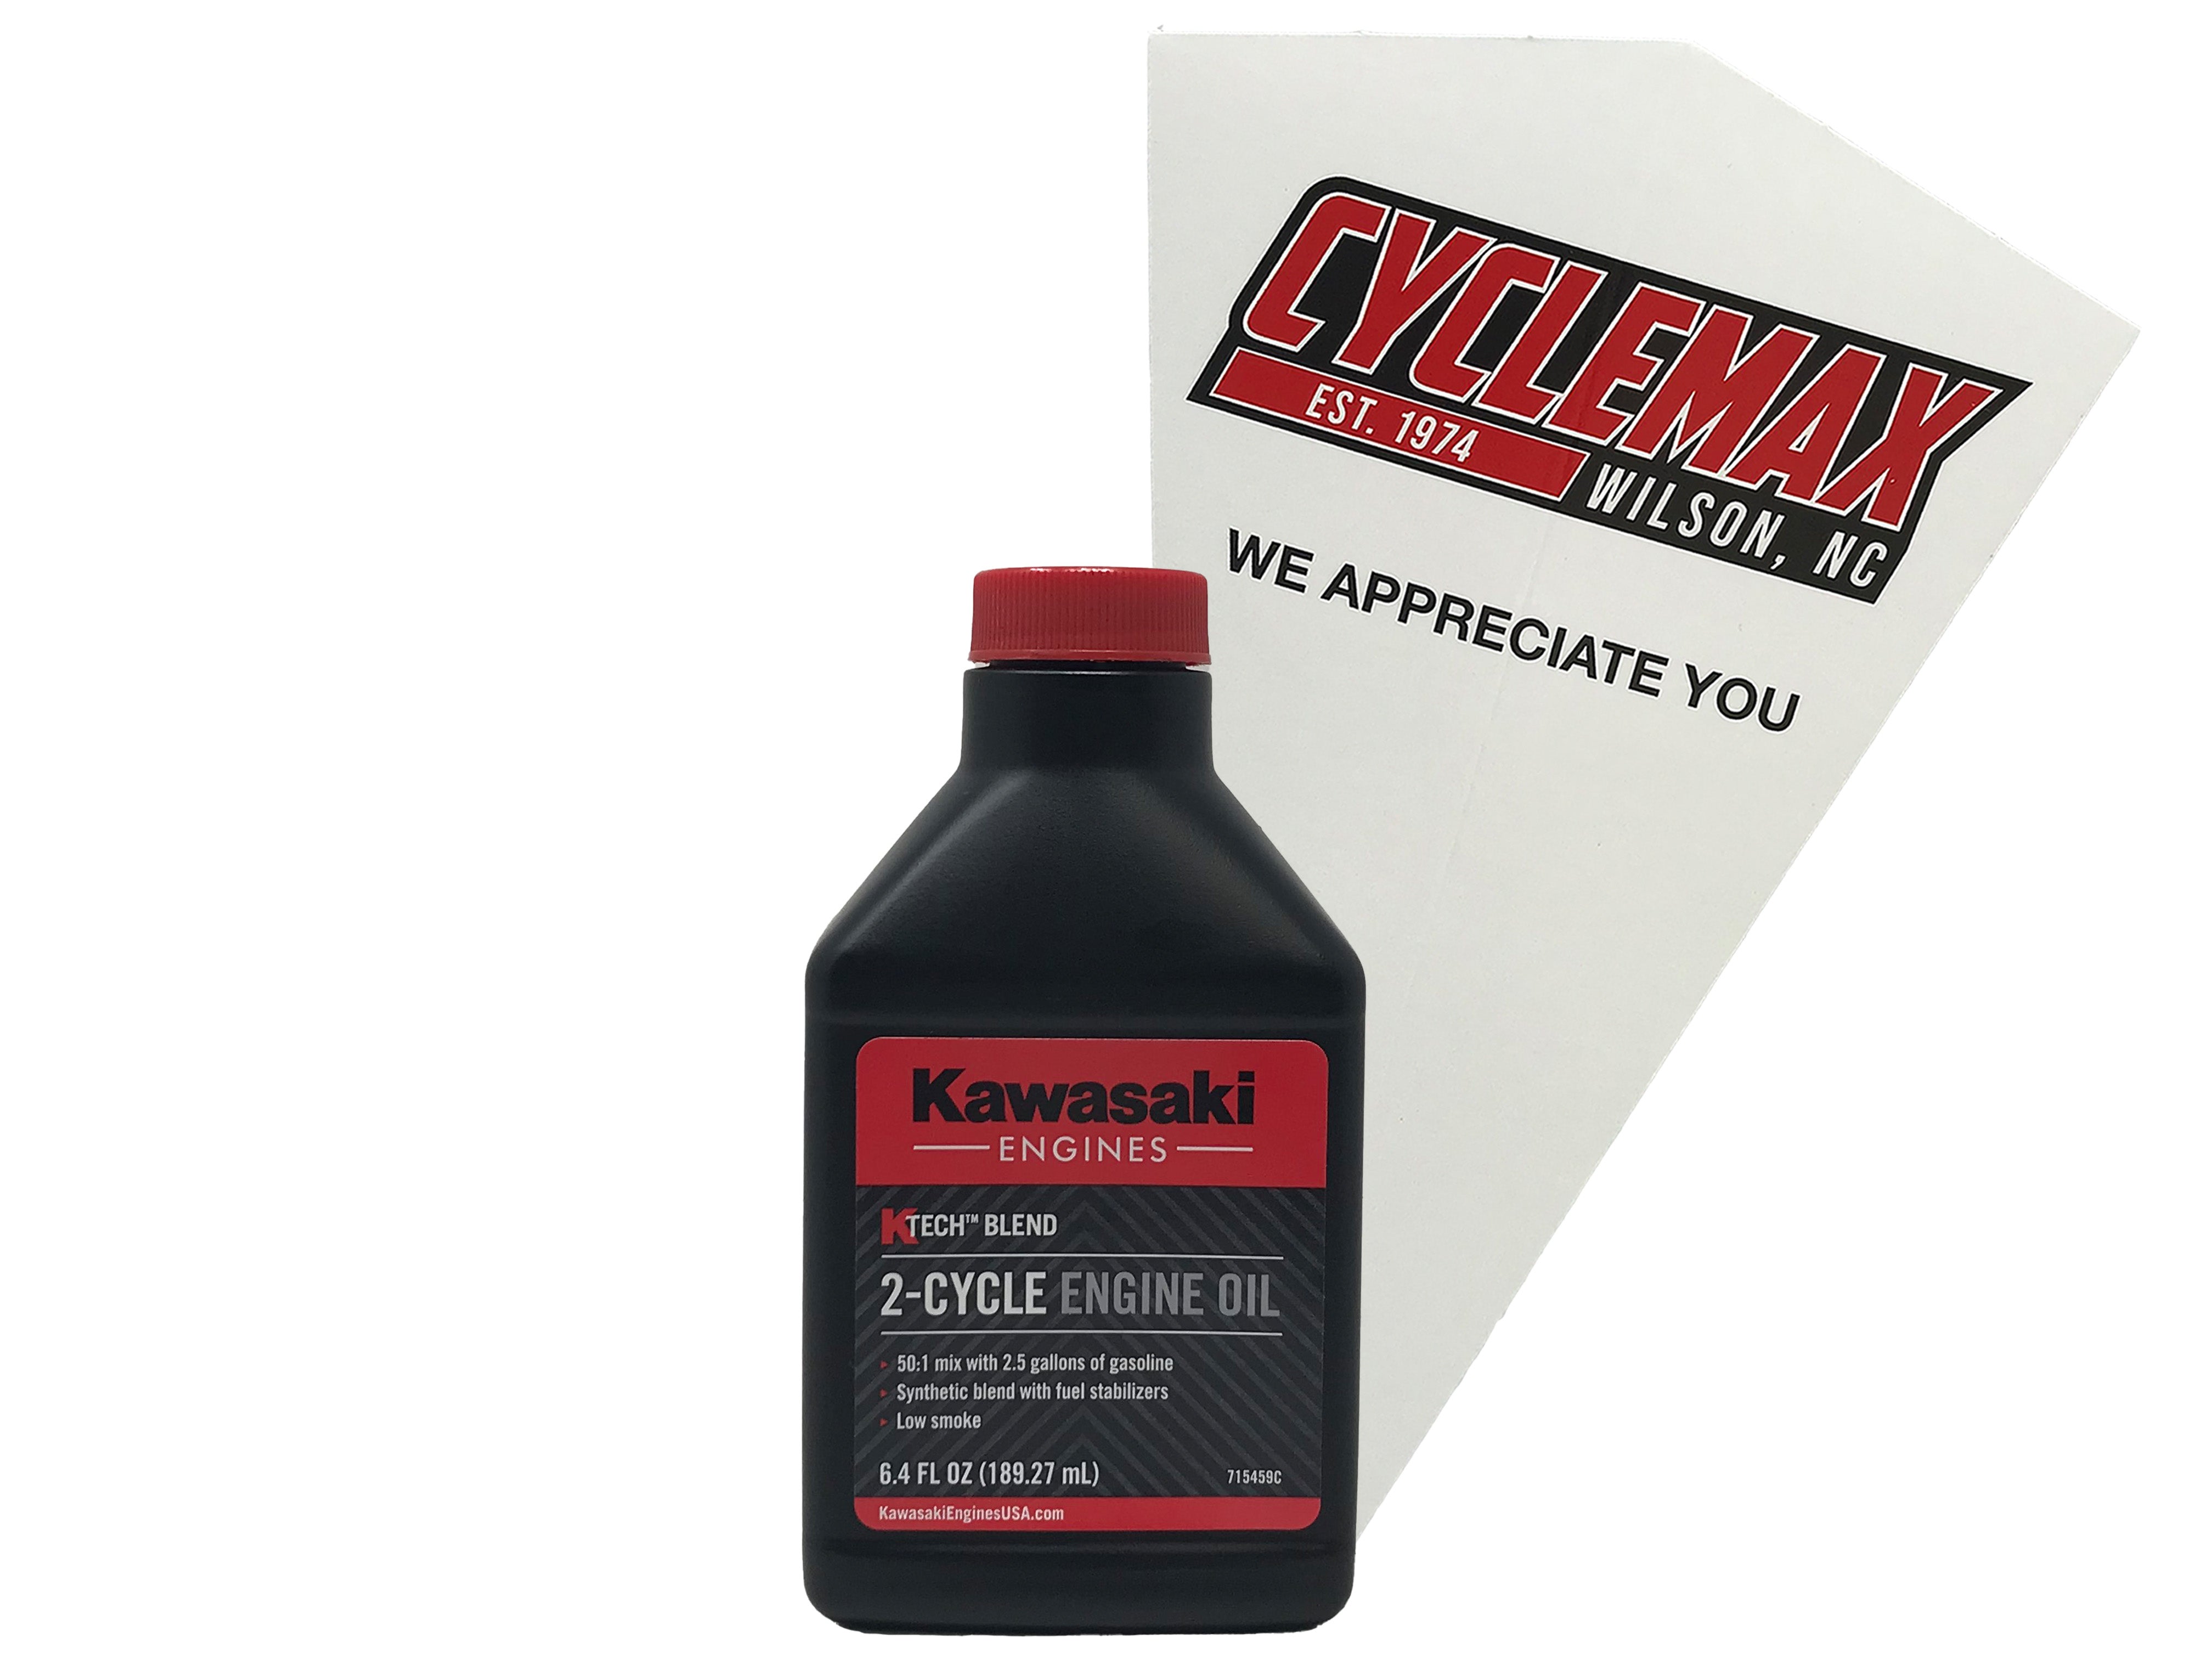 Cyclemax One Pack of Kawasaki KTech 2-Cycle Two Stroke Engine Oil 6.4oz 99969-6084 Contains One Bottle and a Funnel